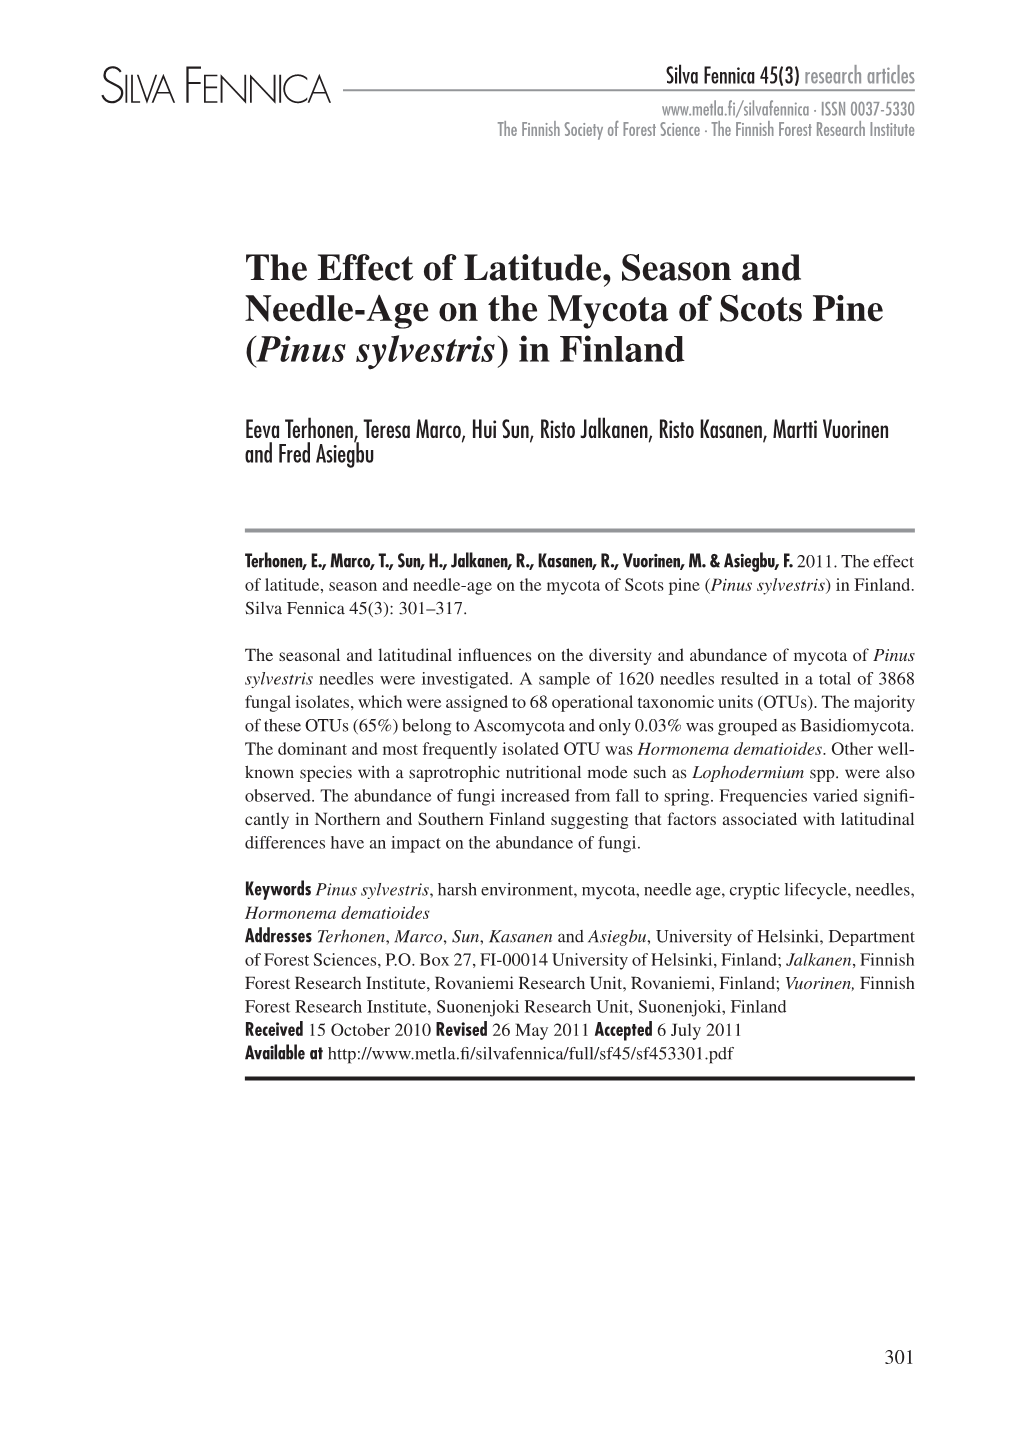 The Effect of Latitude, Season and Needle-Age on the Mycota of Scots Pine (Pinus Sylvestris) in Finland